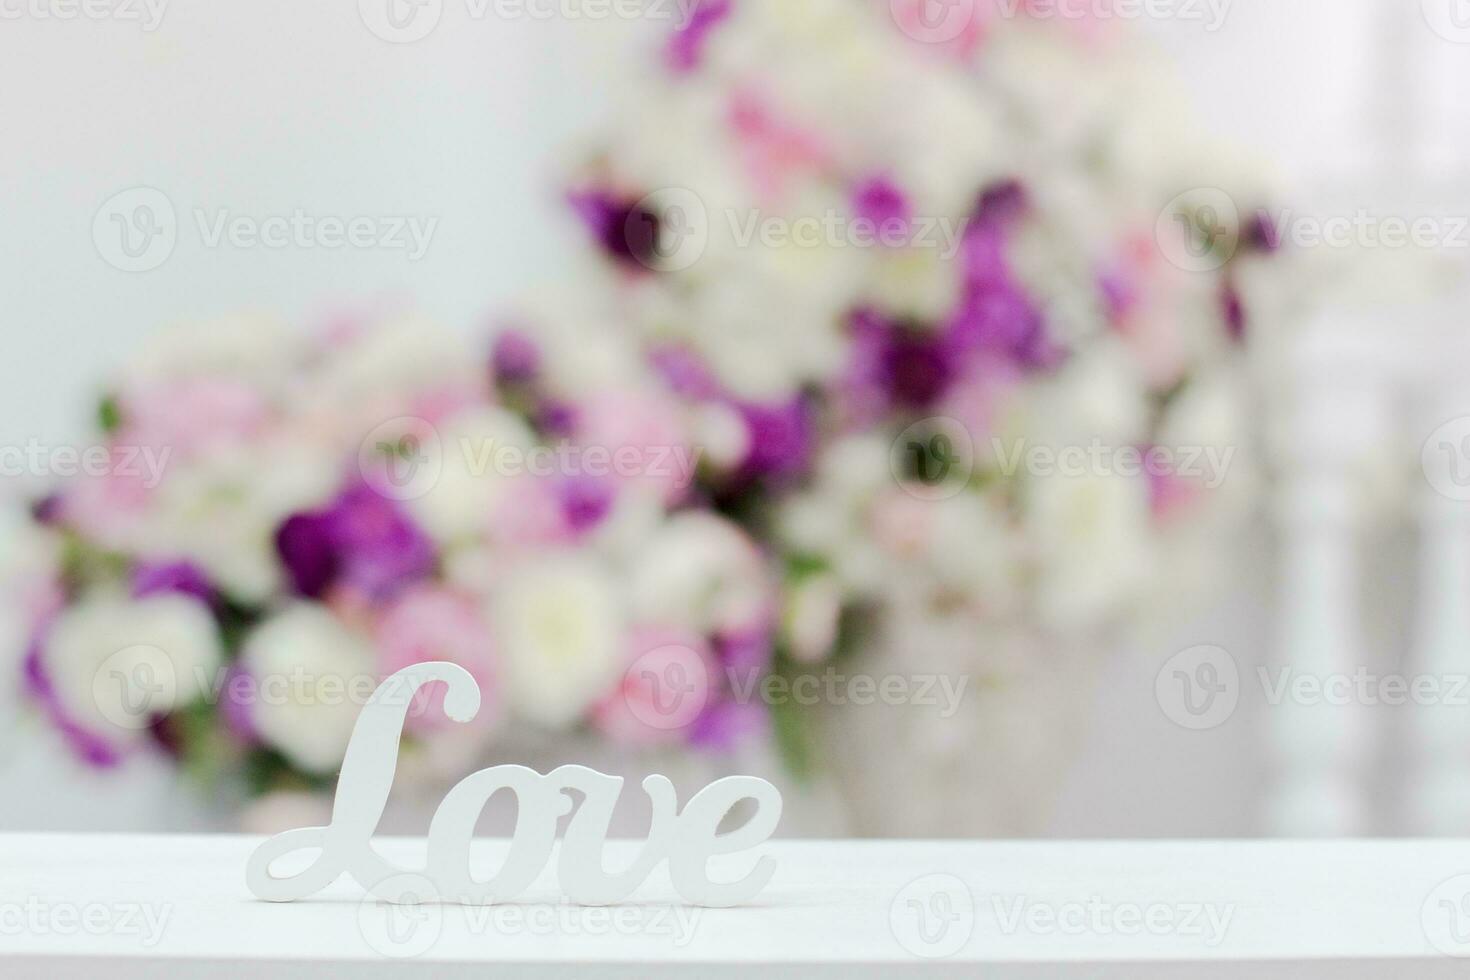 inscription love on a background of flowers photo